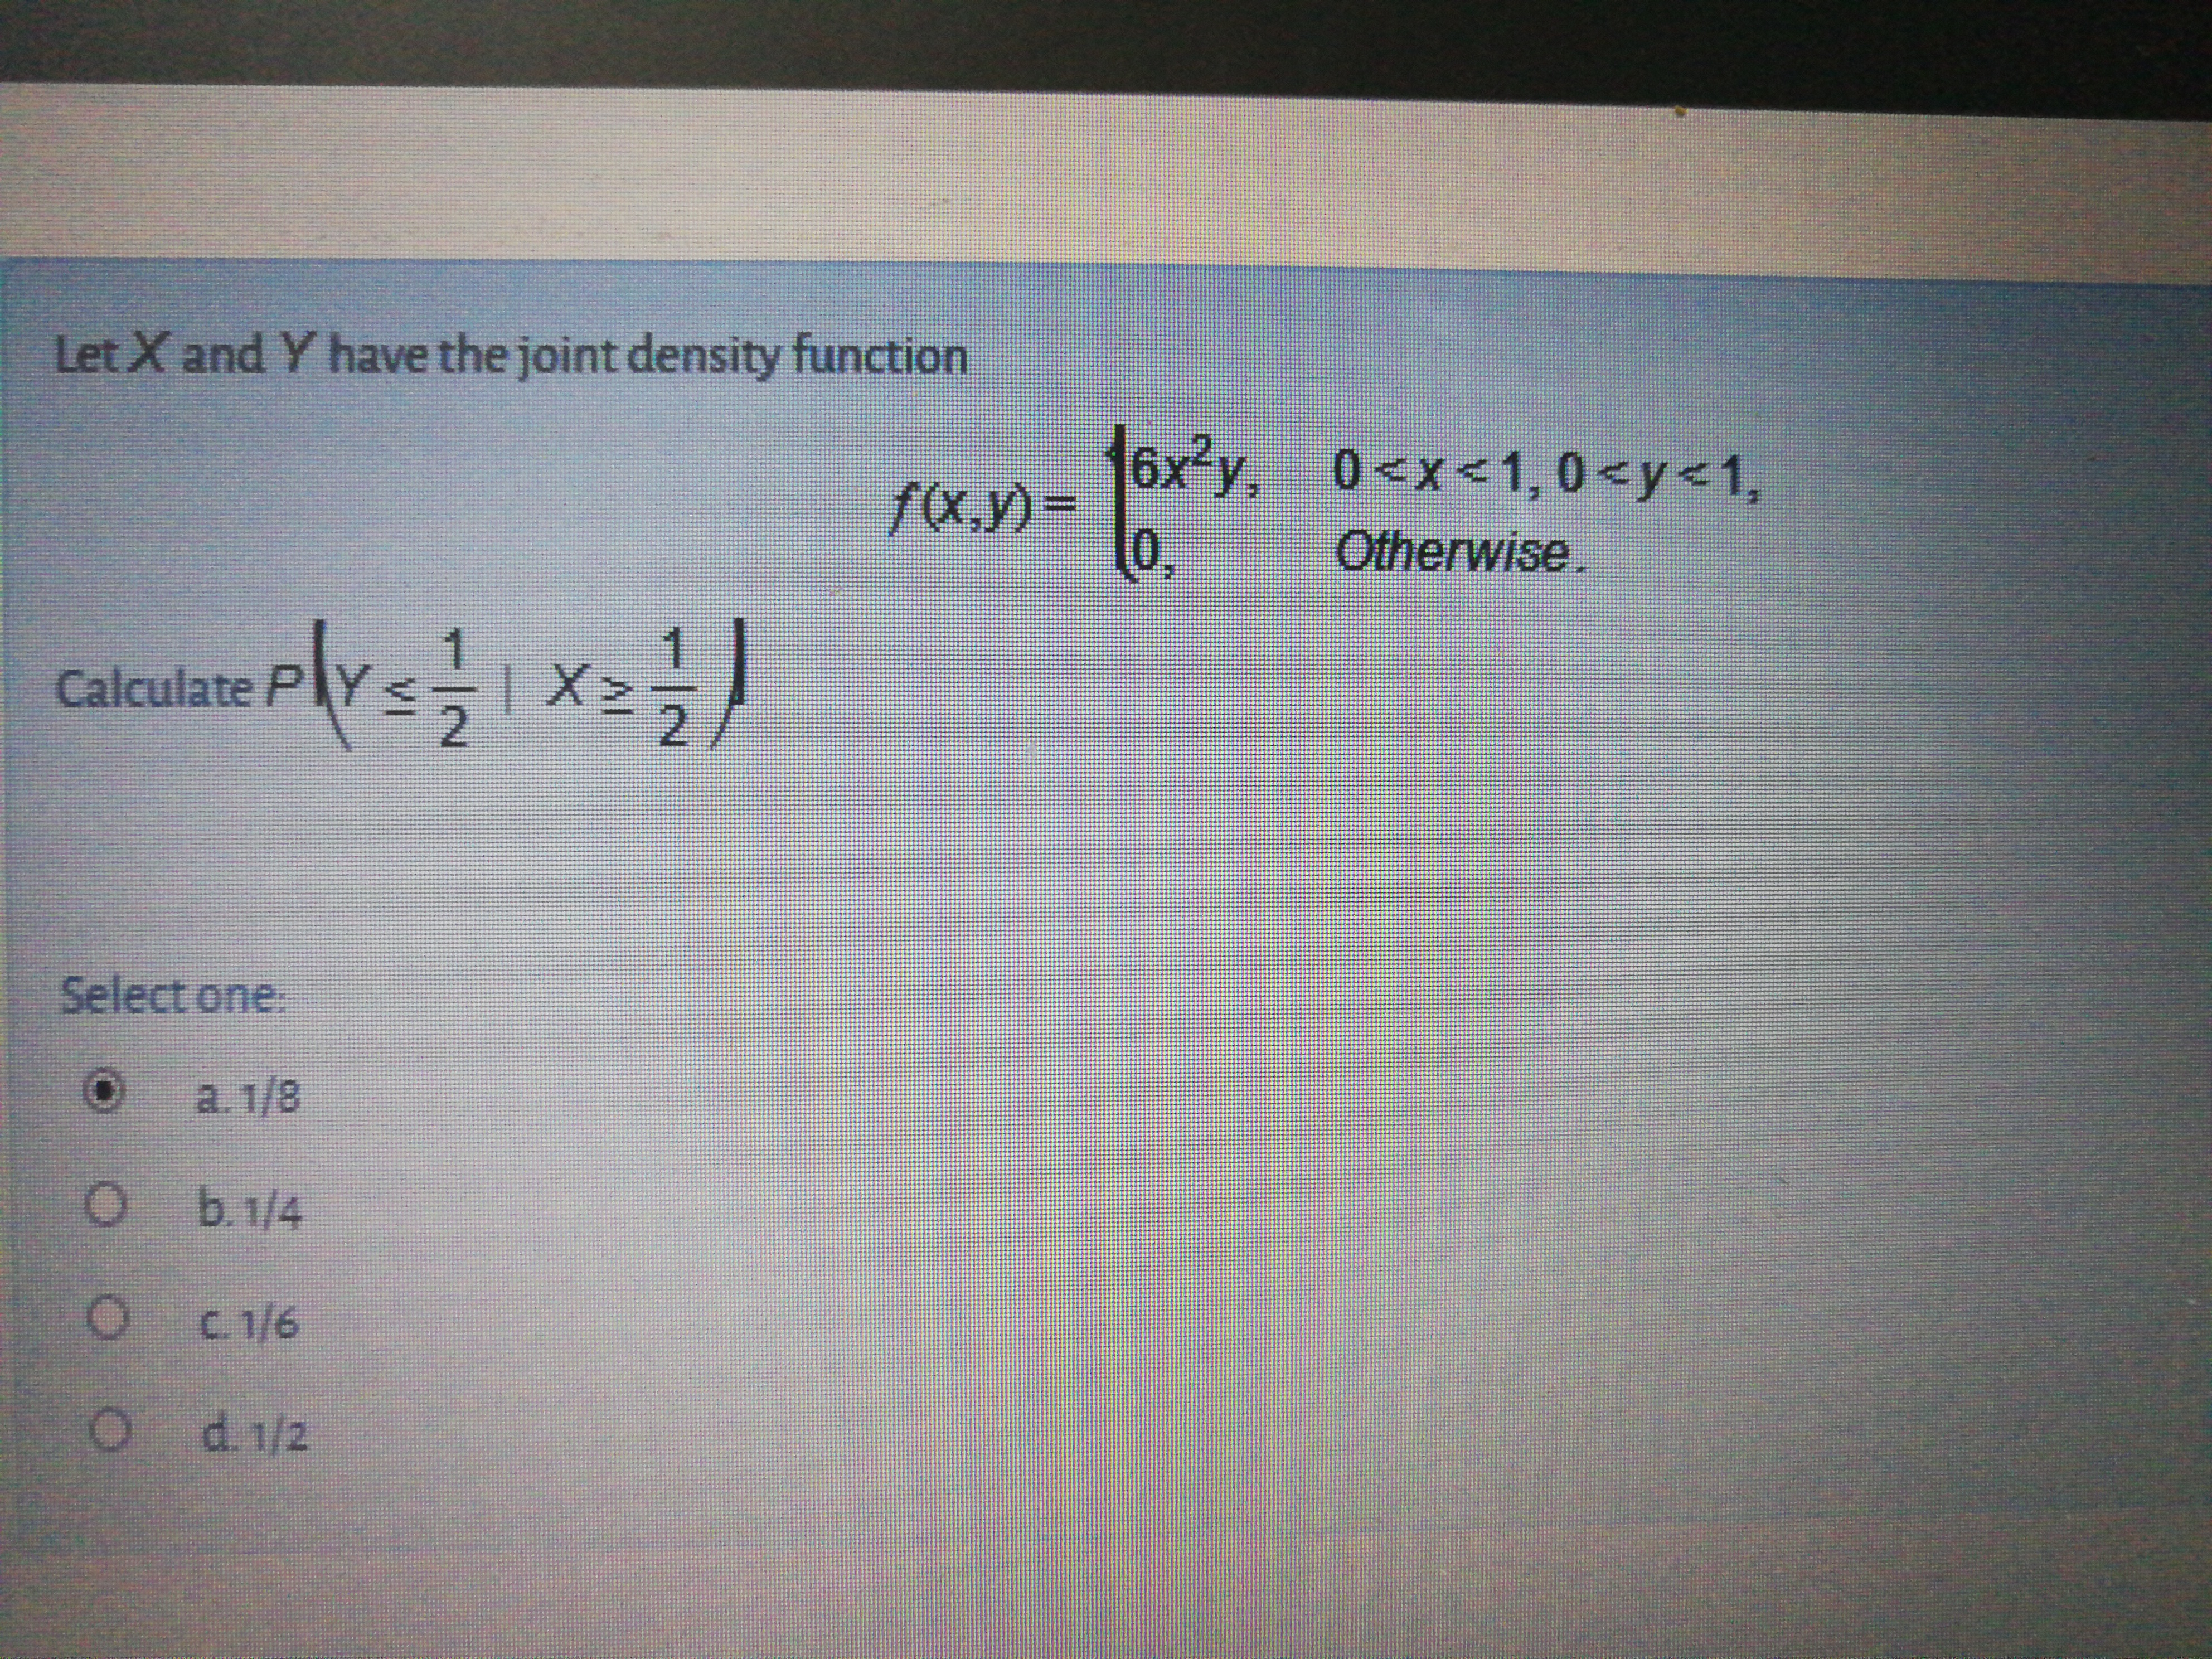 Let X and Y have the joint density function
16x²y.
fx,y)=
0,
6x3y, 0<x<1, 0 <y<1,
Otherwise.
